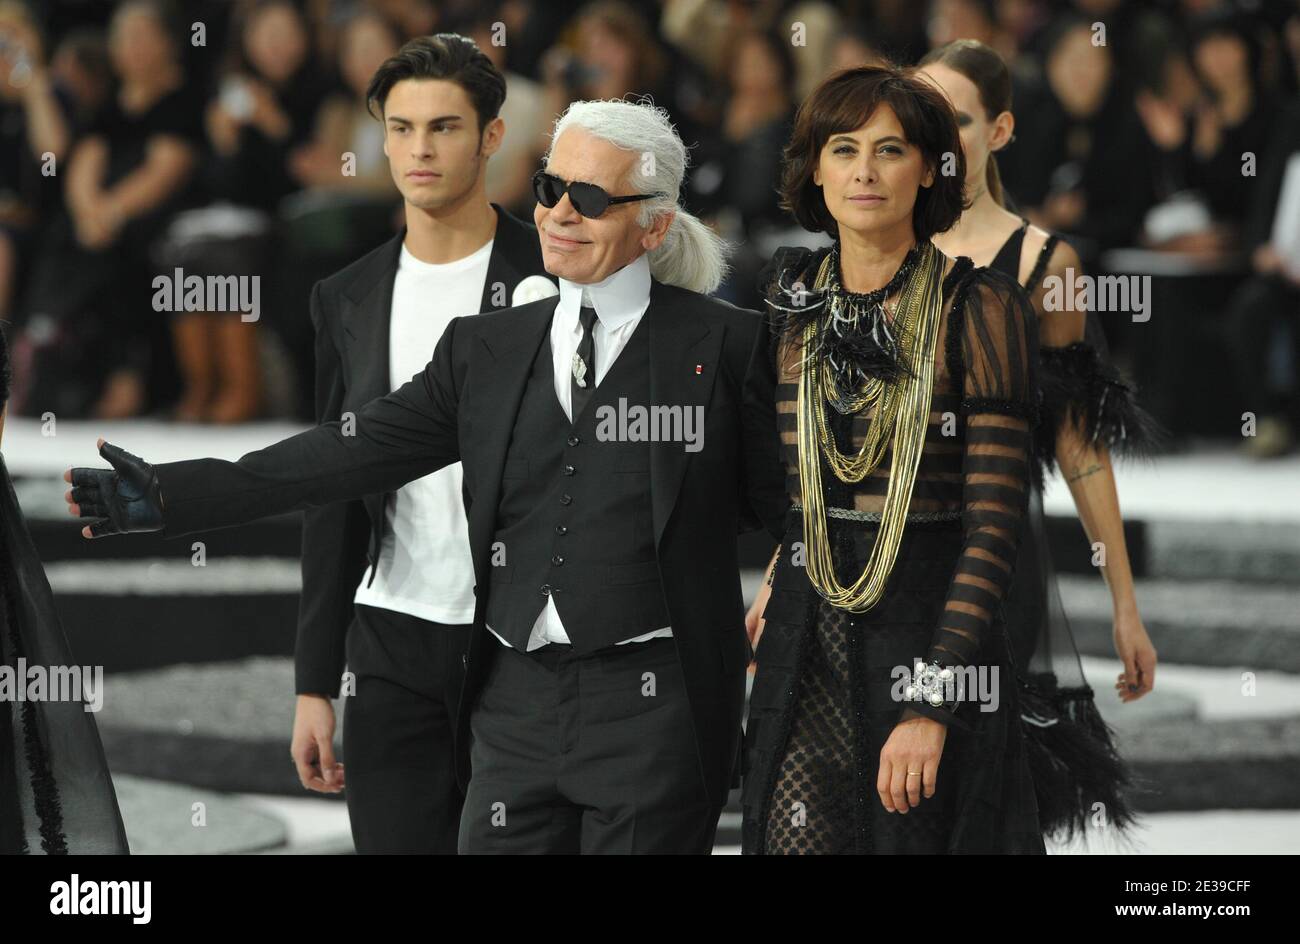 Baptiste Giabiconi attending the Chanel Fashion Show Spring/Summer 2011  Collection Launch held at Pavillon Cambon, on January 25, 2011 in Paris,  France. Photo by Nicolas Briquet/ABACAPRESS.COM Stock Photo - Alamy